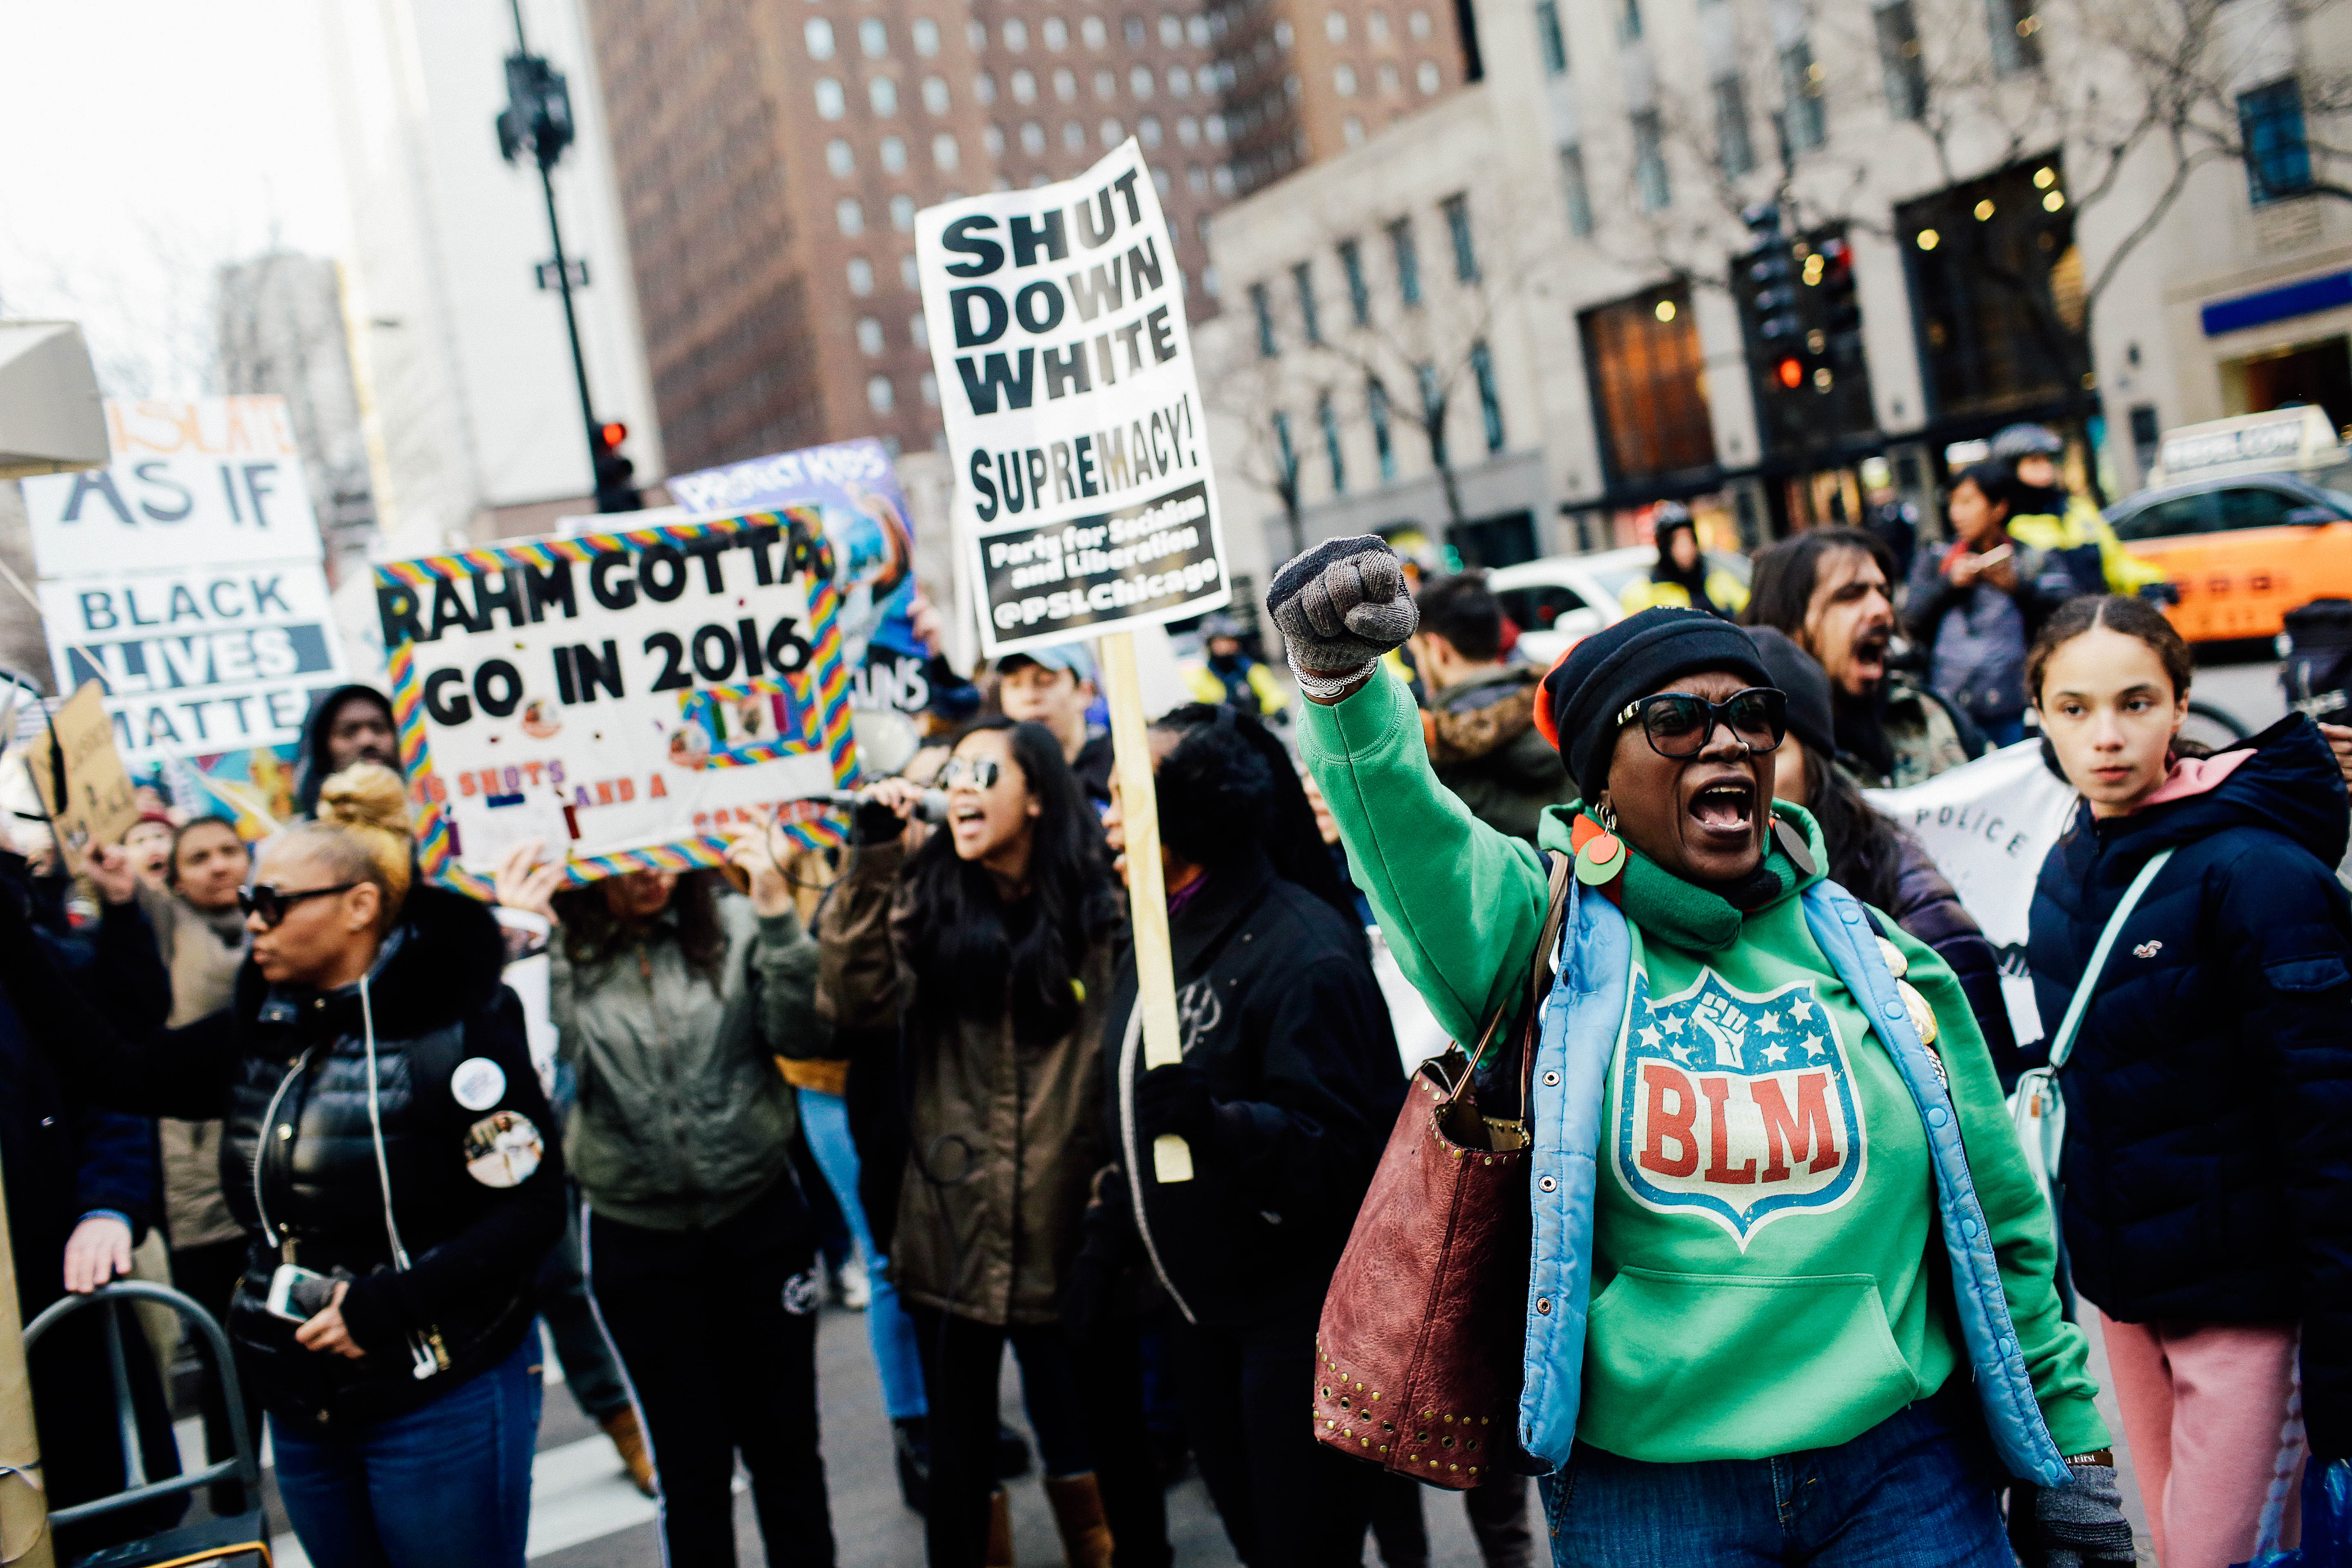 Demonstrators protest along Michigan Avenue on April 2 in Chicago in response to the police shooting of Stephon Clark in Sacramento, California, and other victims of police shootings.